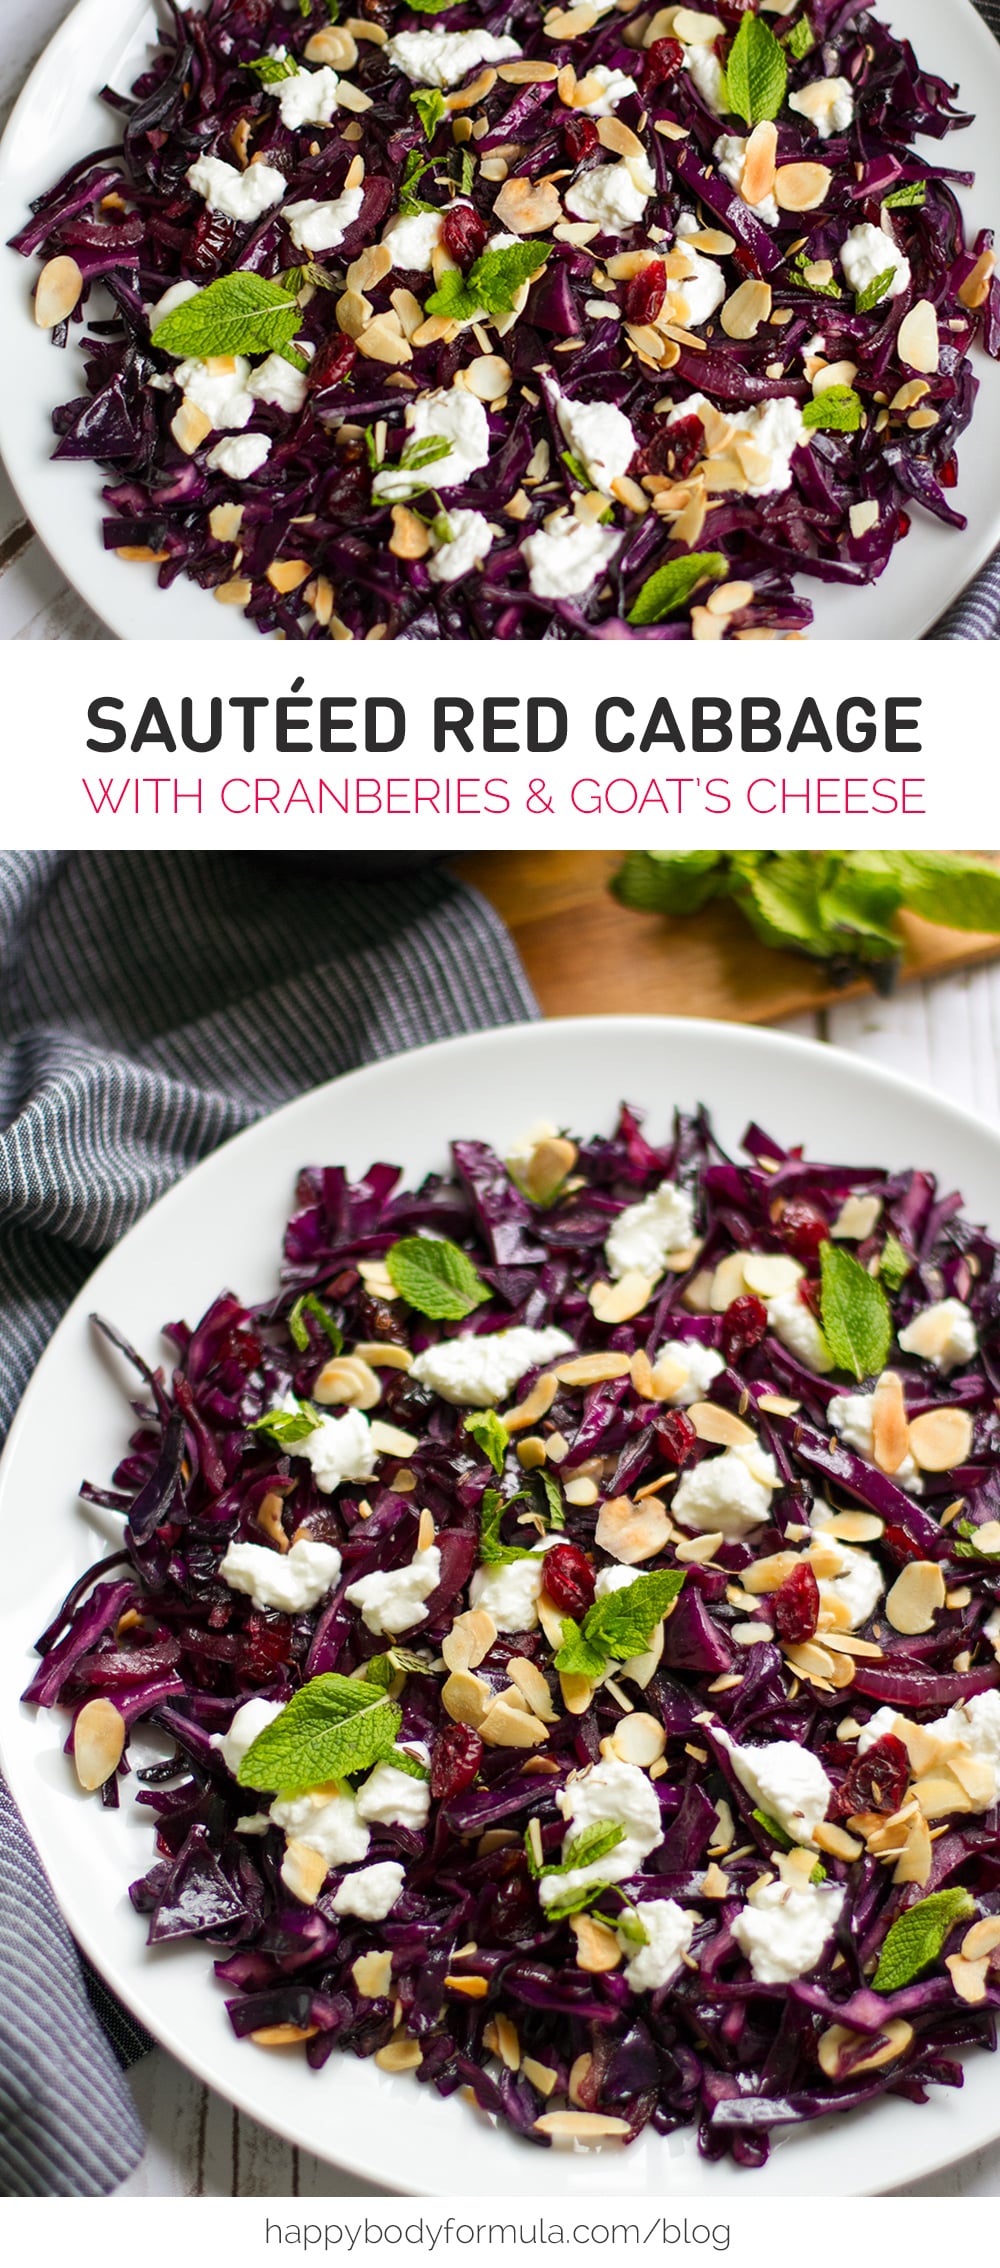 Warm Red Cabbage with Cranberries, Goat's Cheese & Almonds - gluten free, paleo-ish and primal recipe for all to enjoy.